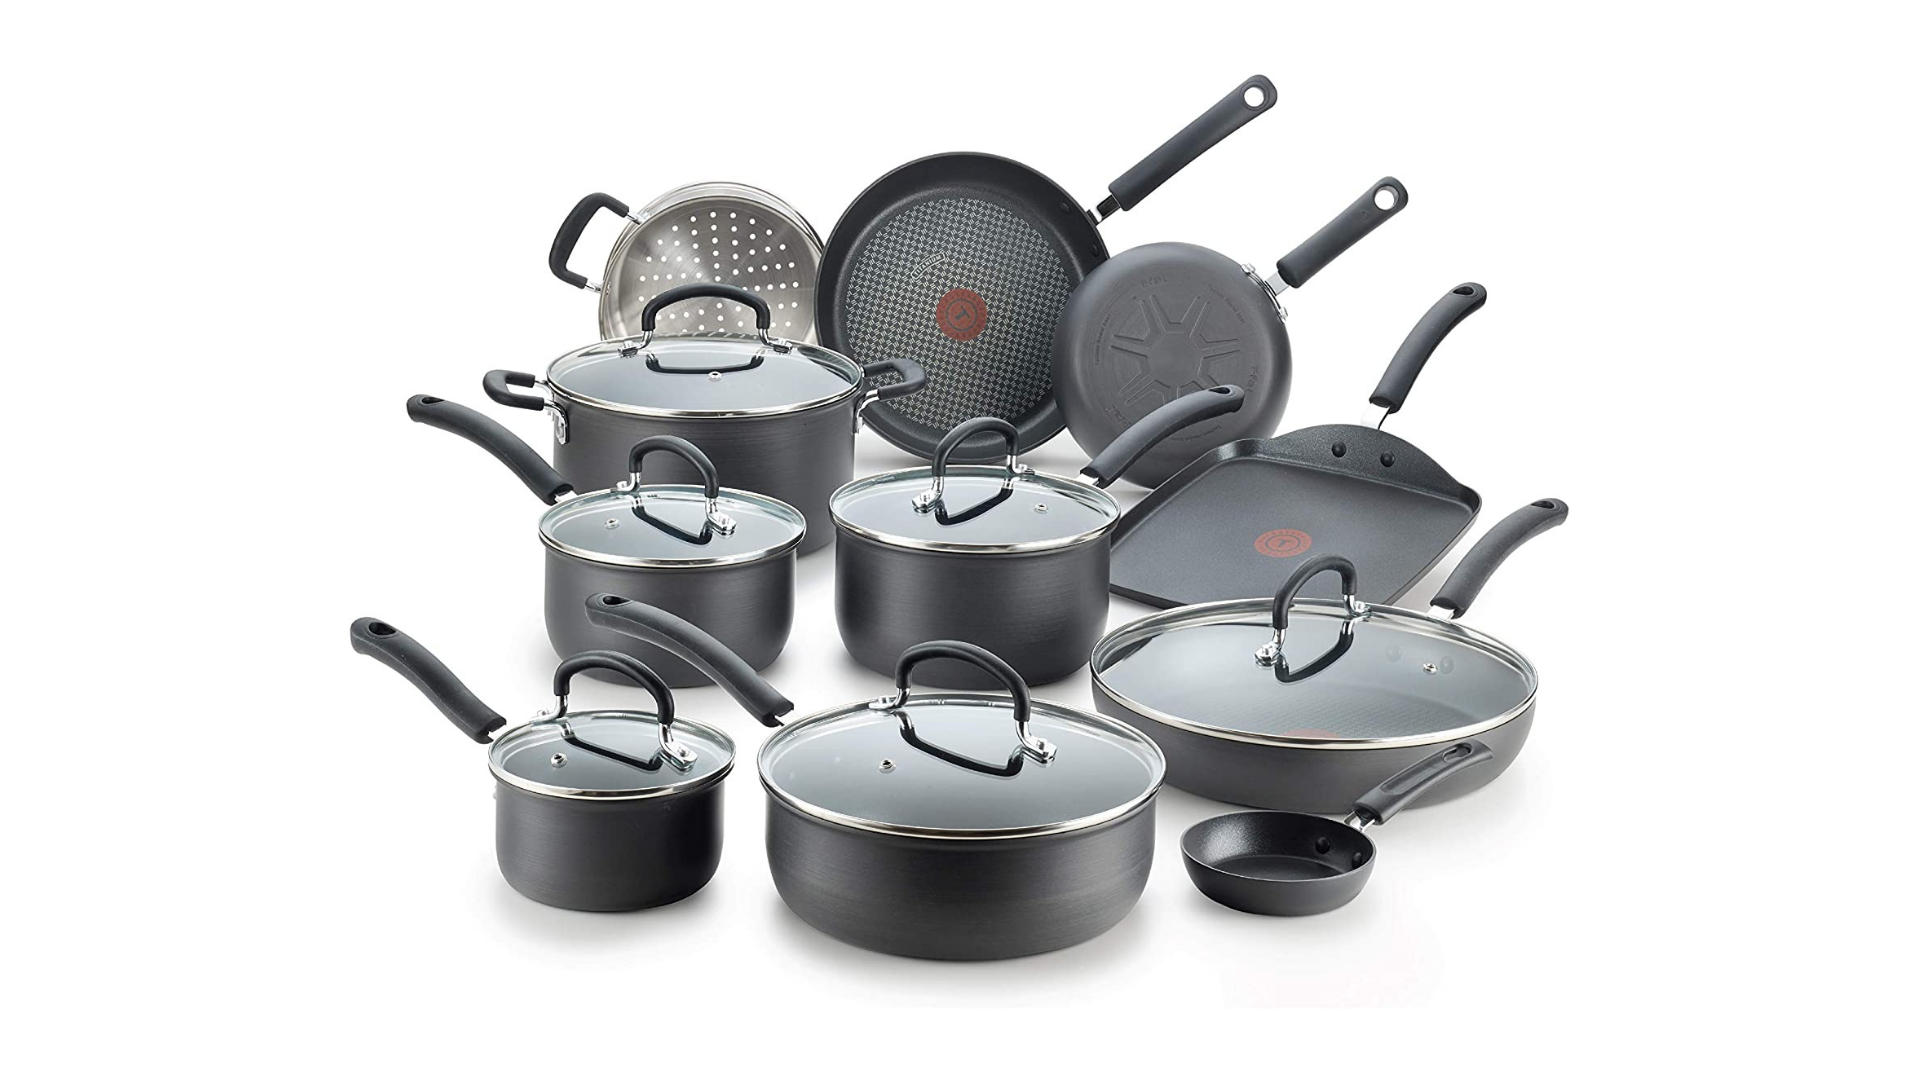 Talk about quality. The ceramic-coated Goodful 12-piece Titanium